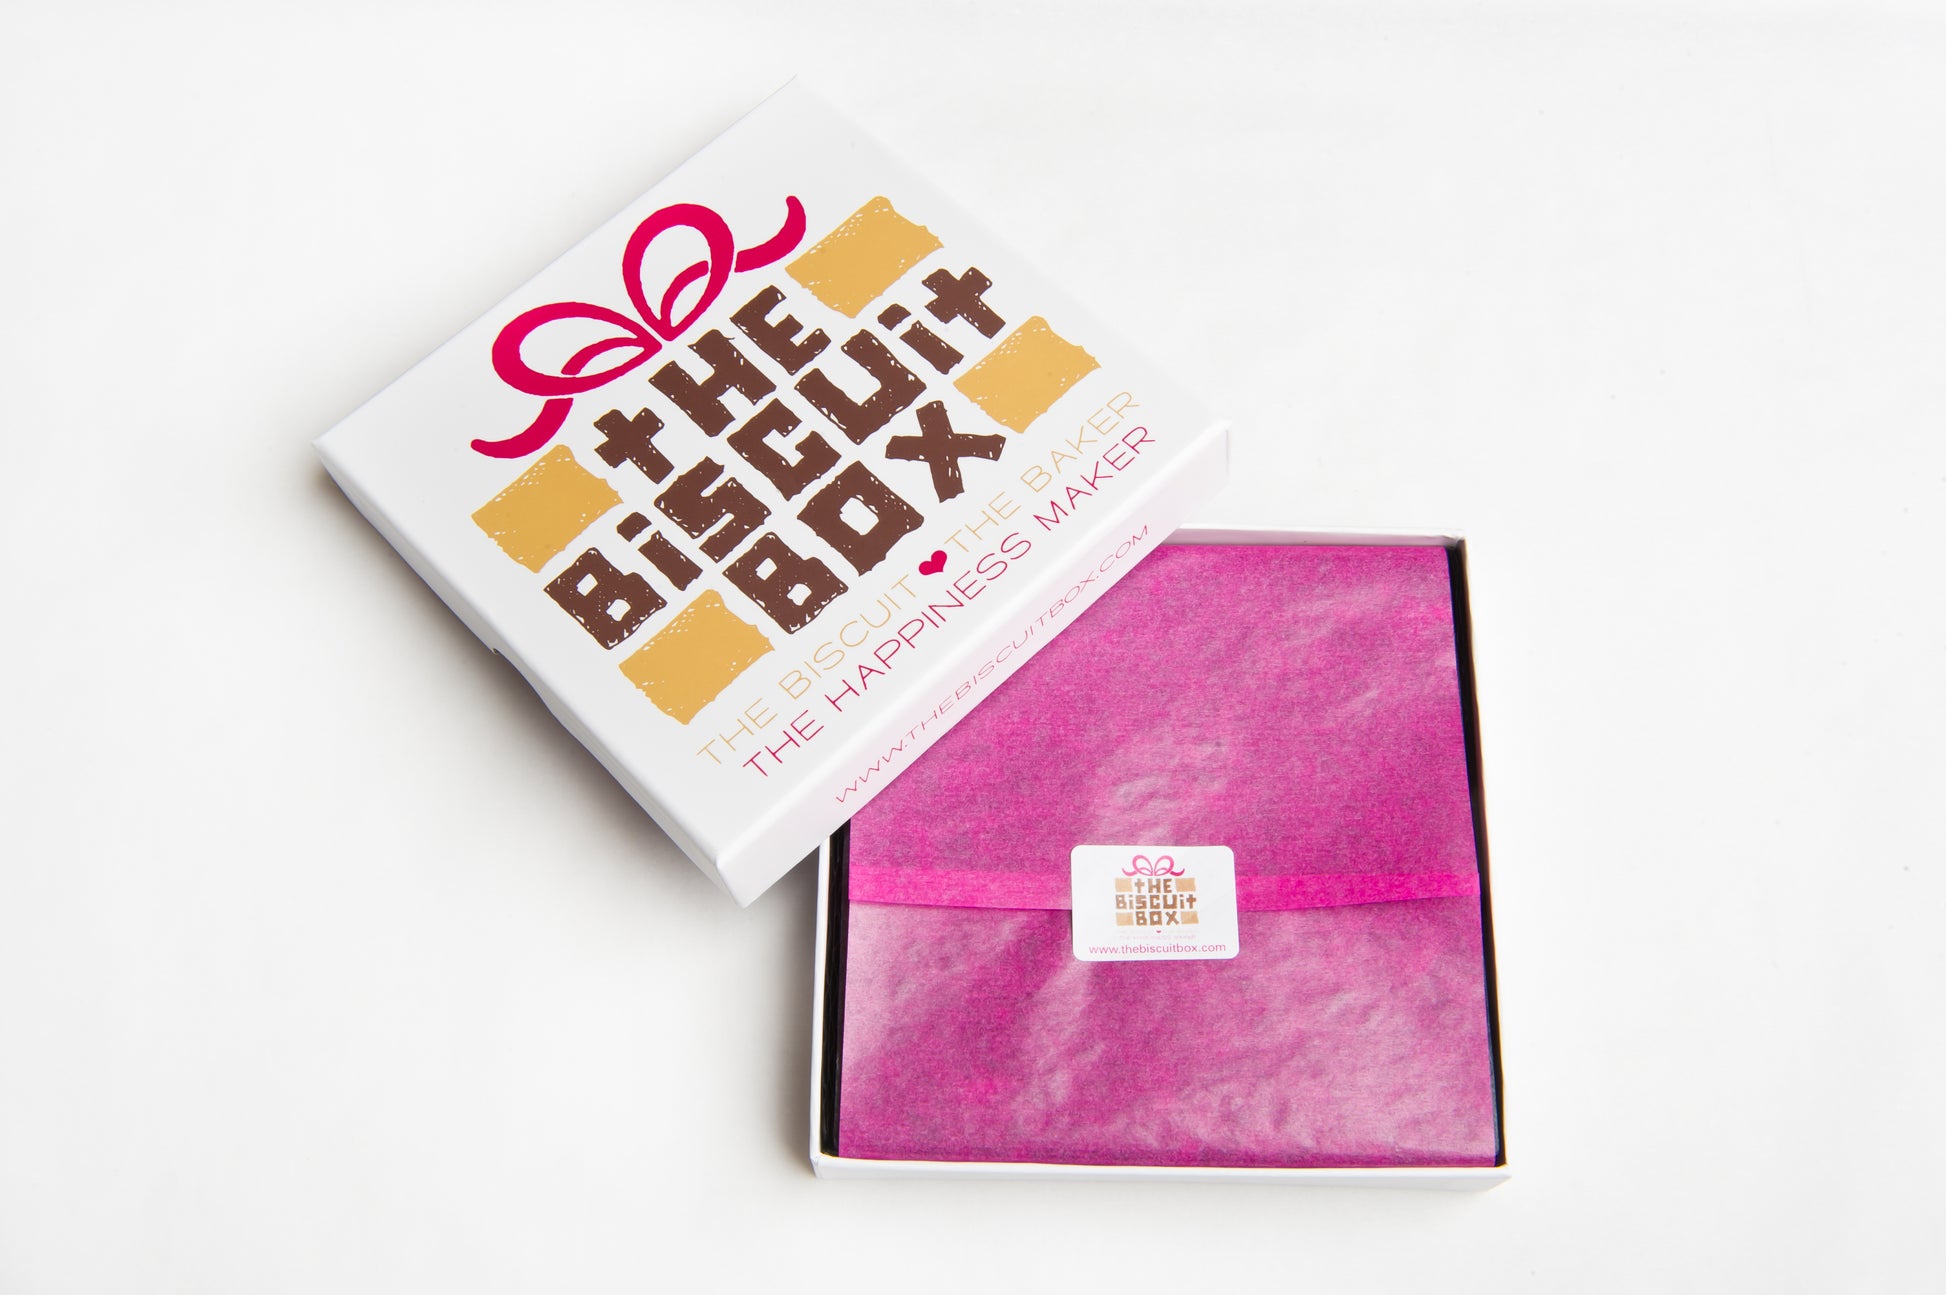 image to show biscuit card packaging. branded lid with pink tissue paper and branded sticker. Small box to fit through letter box so biscuits can be sent by post.